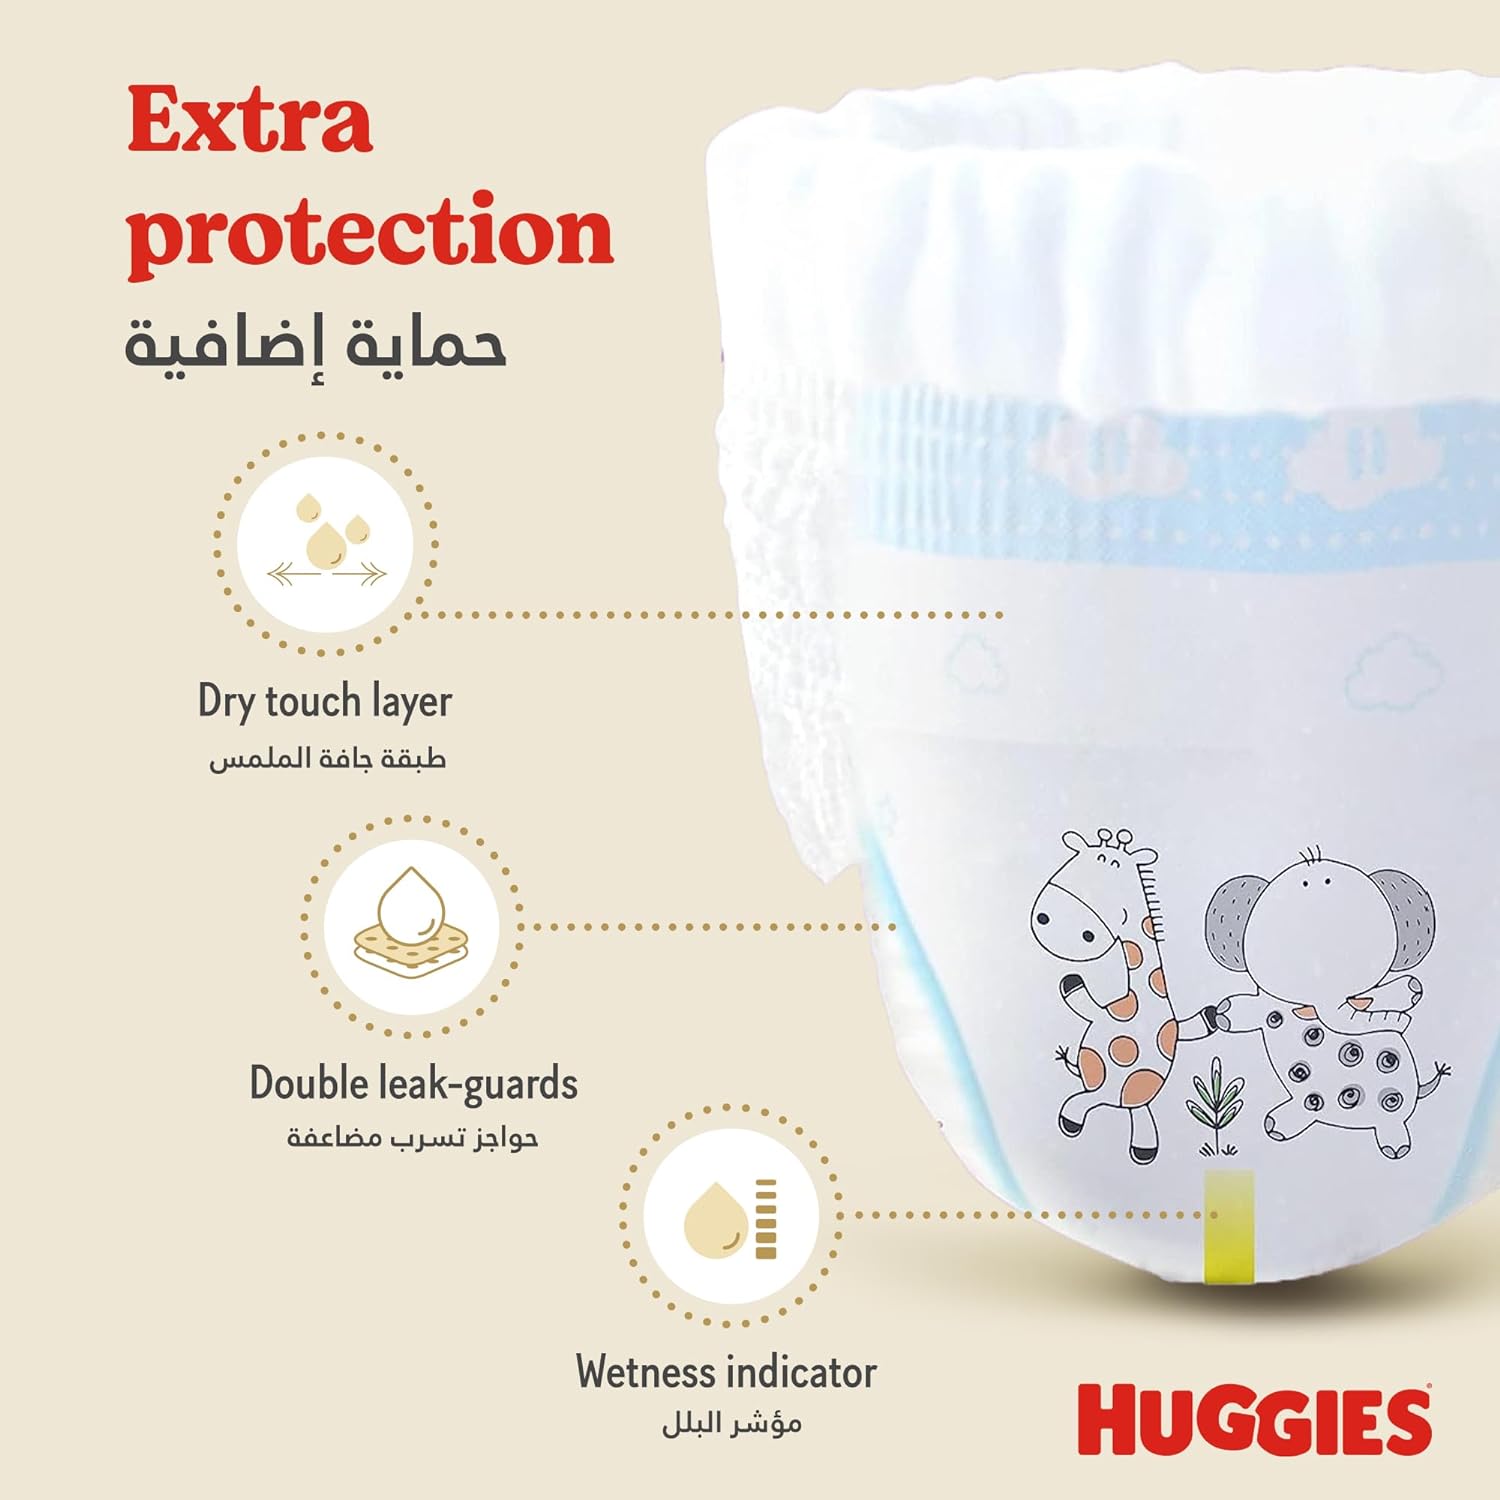 Huggies Extra Care Culottes, Size 5, 12 - 17 kg, Twin Jumbo Pack, 88 Diaper Pants